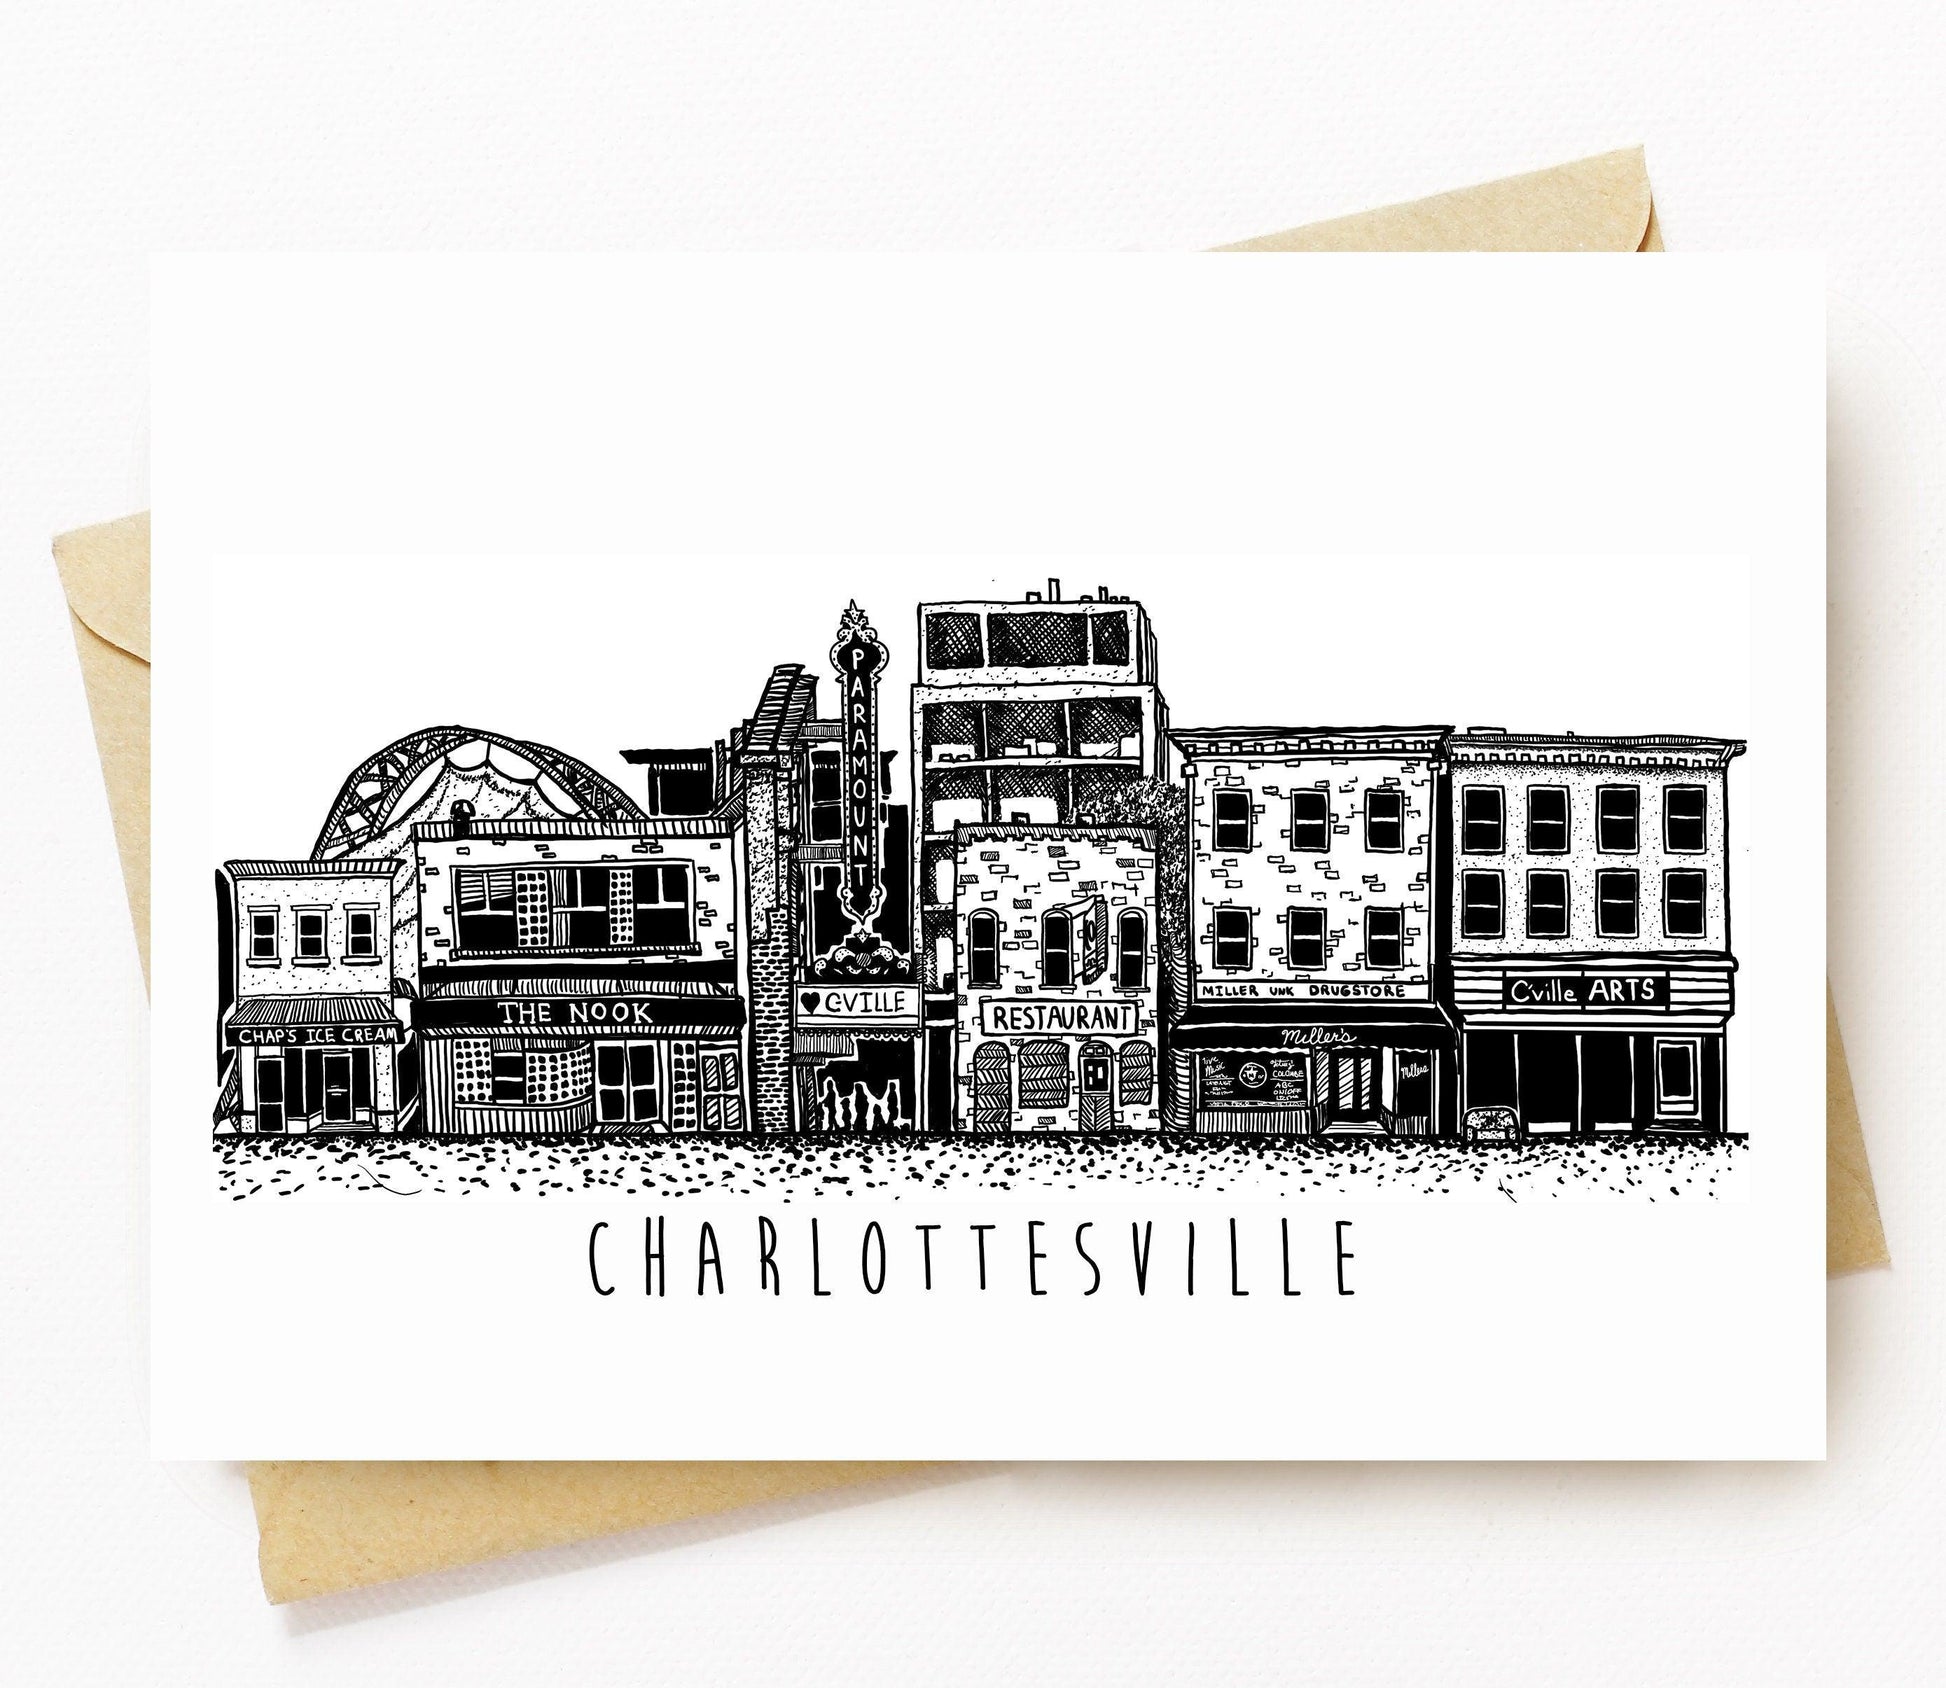 BellavanceInk: Greeting Card Local Shops On The Downtown Mall of Charlottesville Virginia 5 x 7 Inches - BellavanceInk